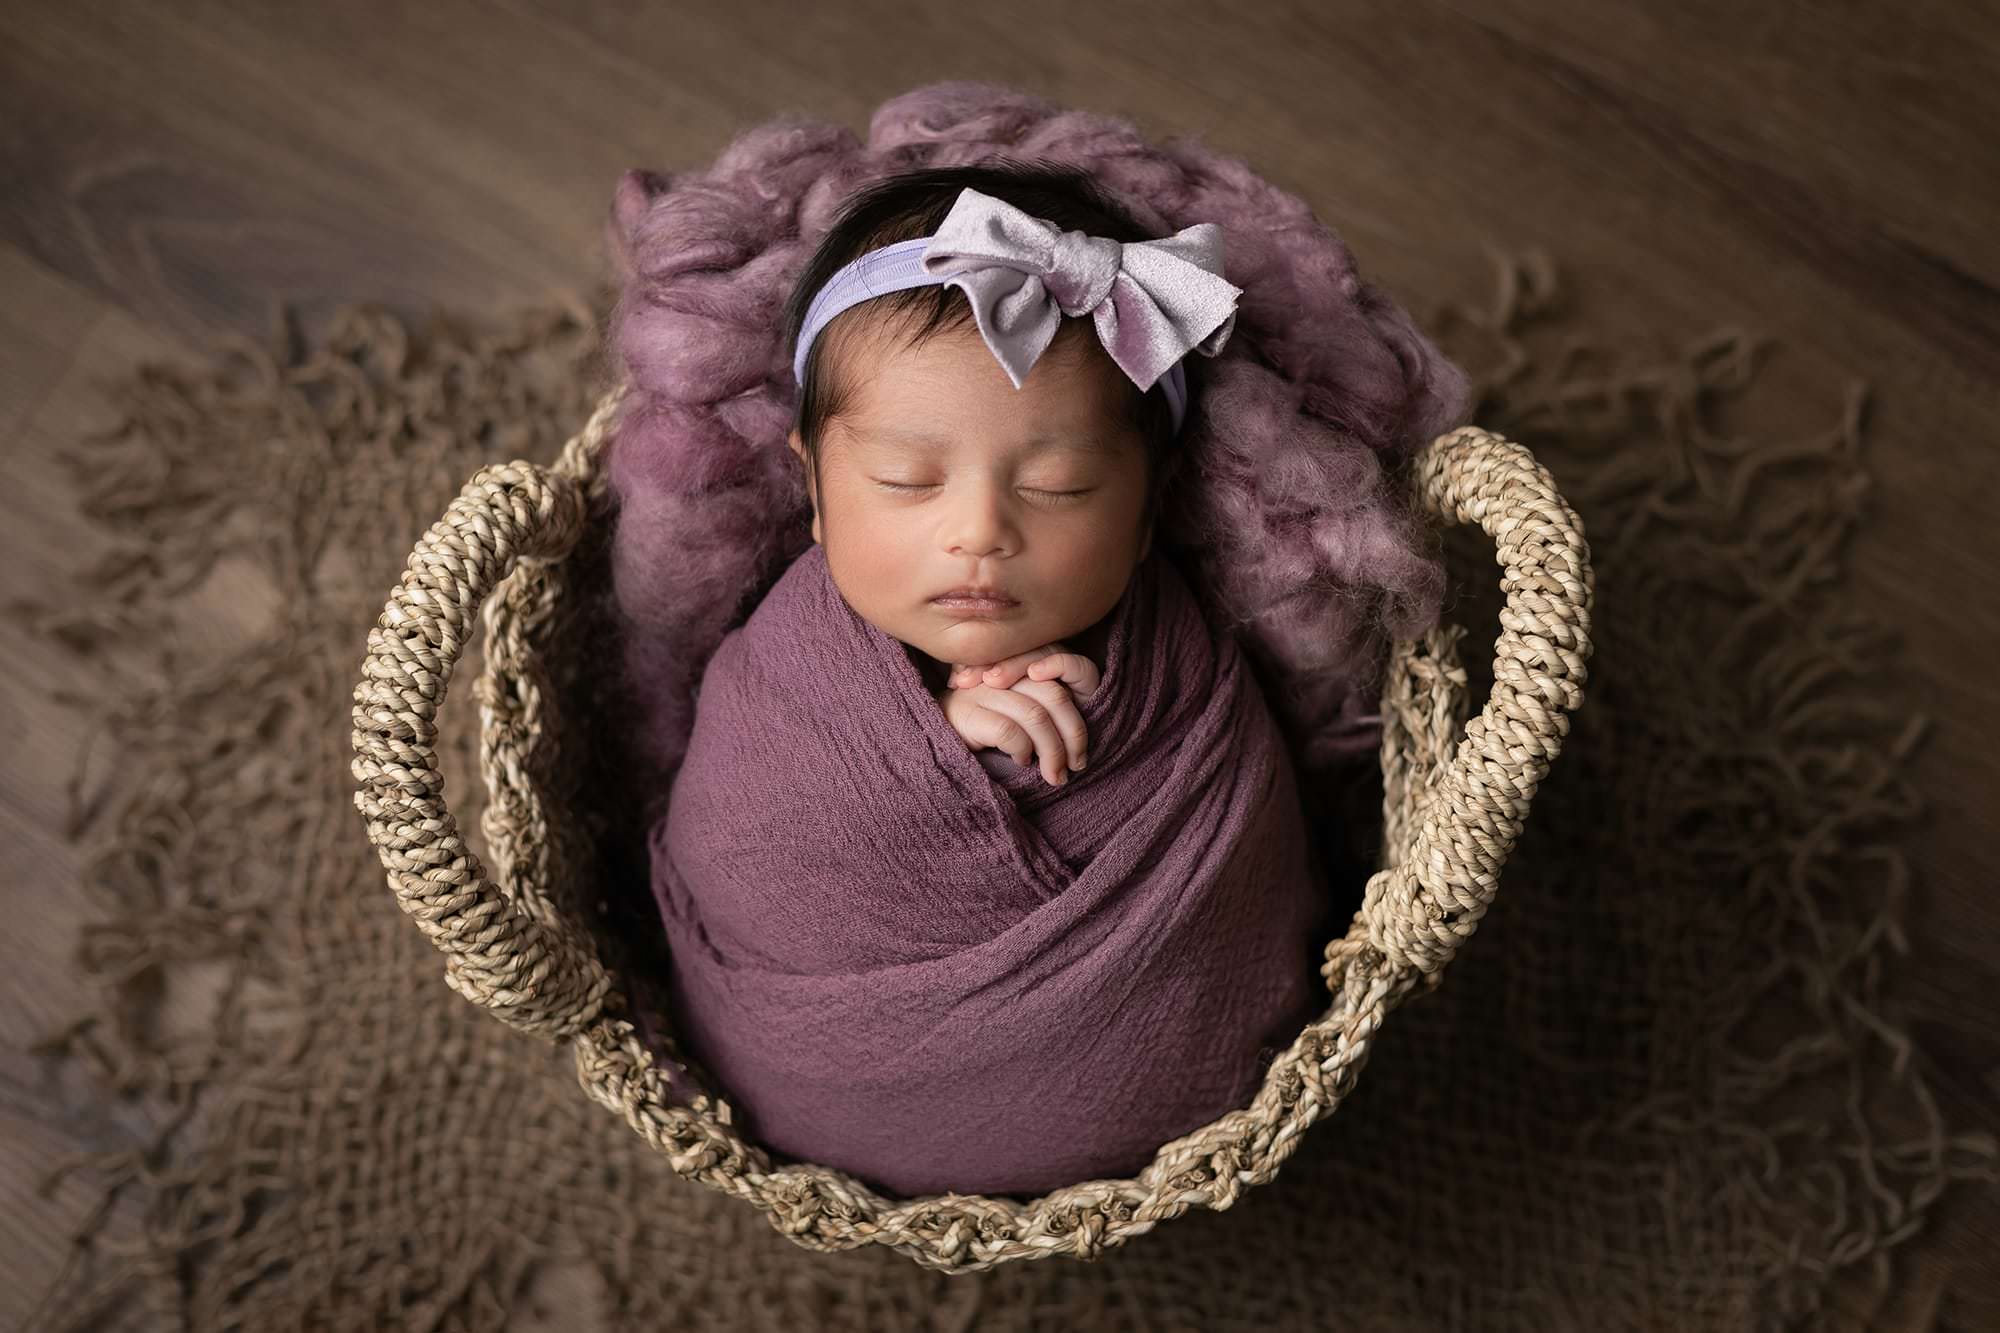 Baby in a round basket, wrapped in purple wrap, with her head looking upwards. Image taken by Glasgow newborn Photographer